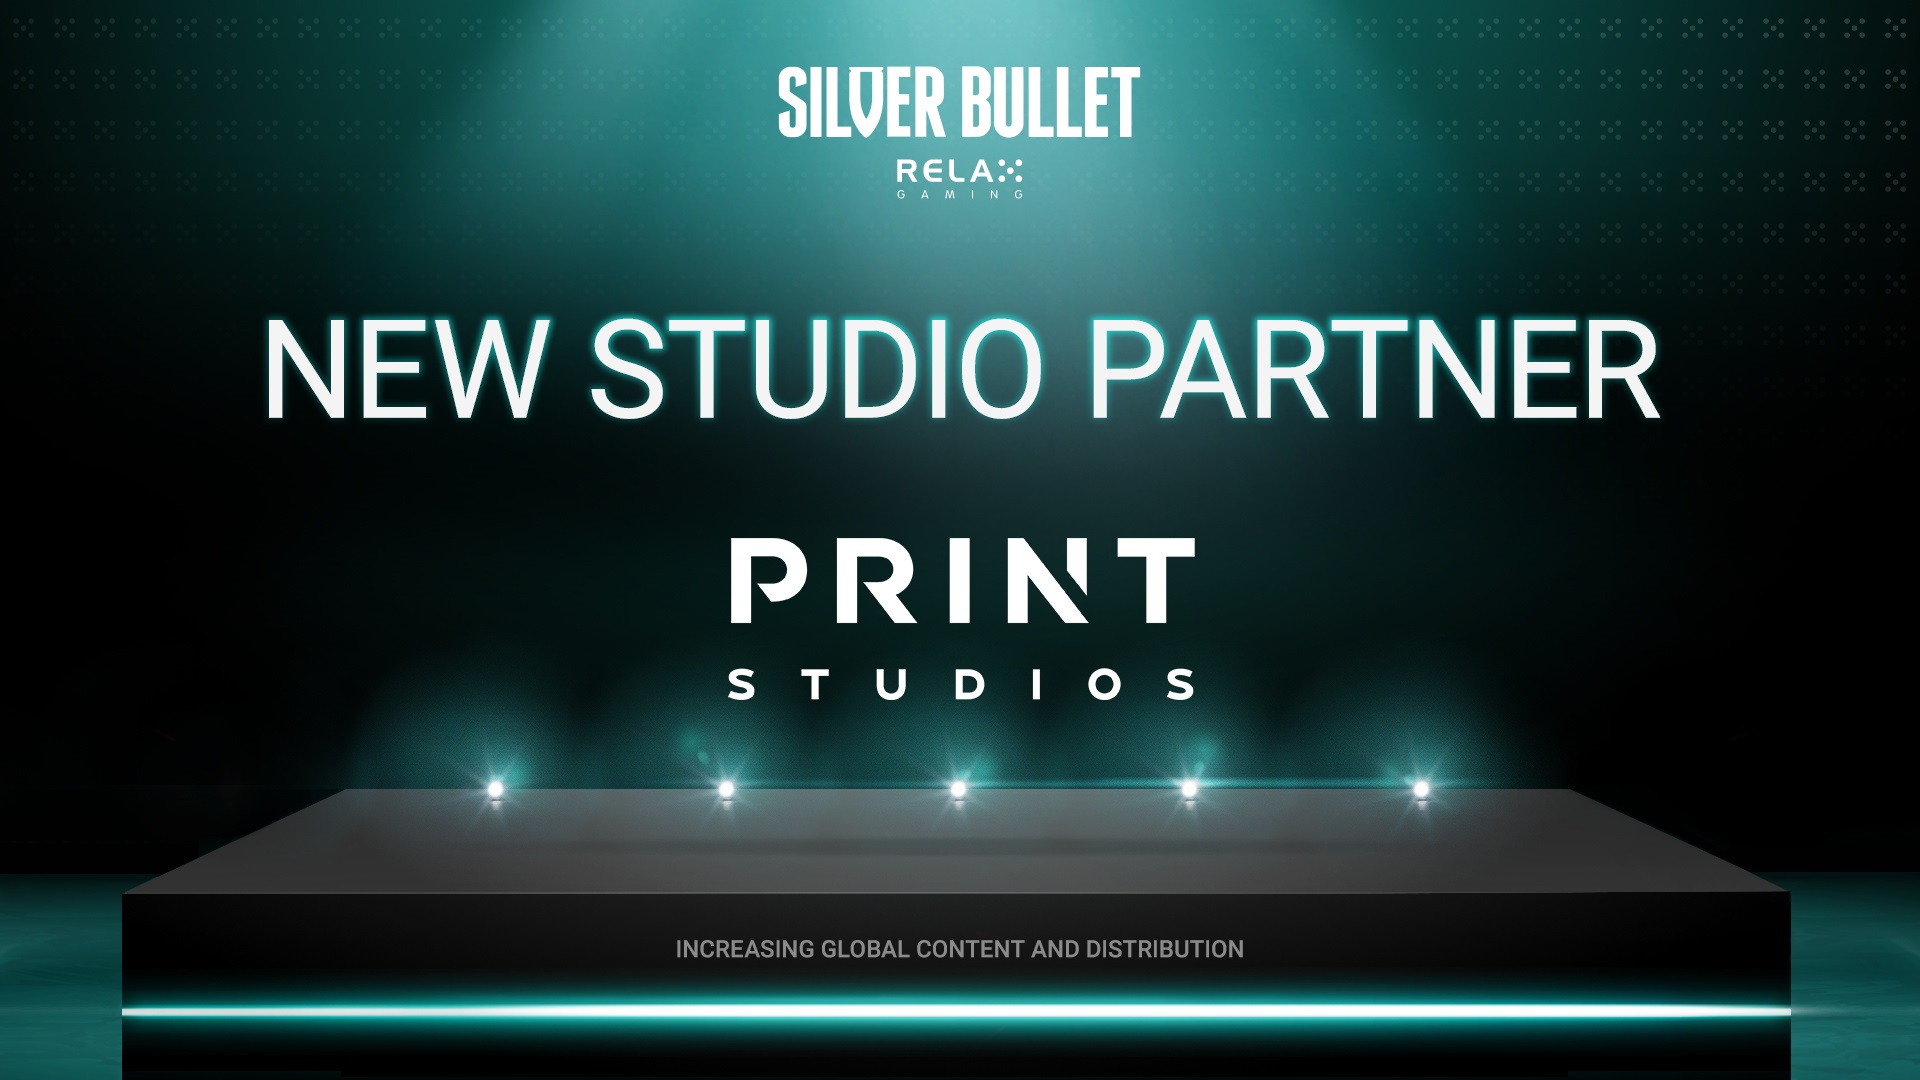 Relax Gaming welcomes Print Studios as latest Silver Bullet partner